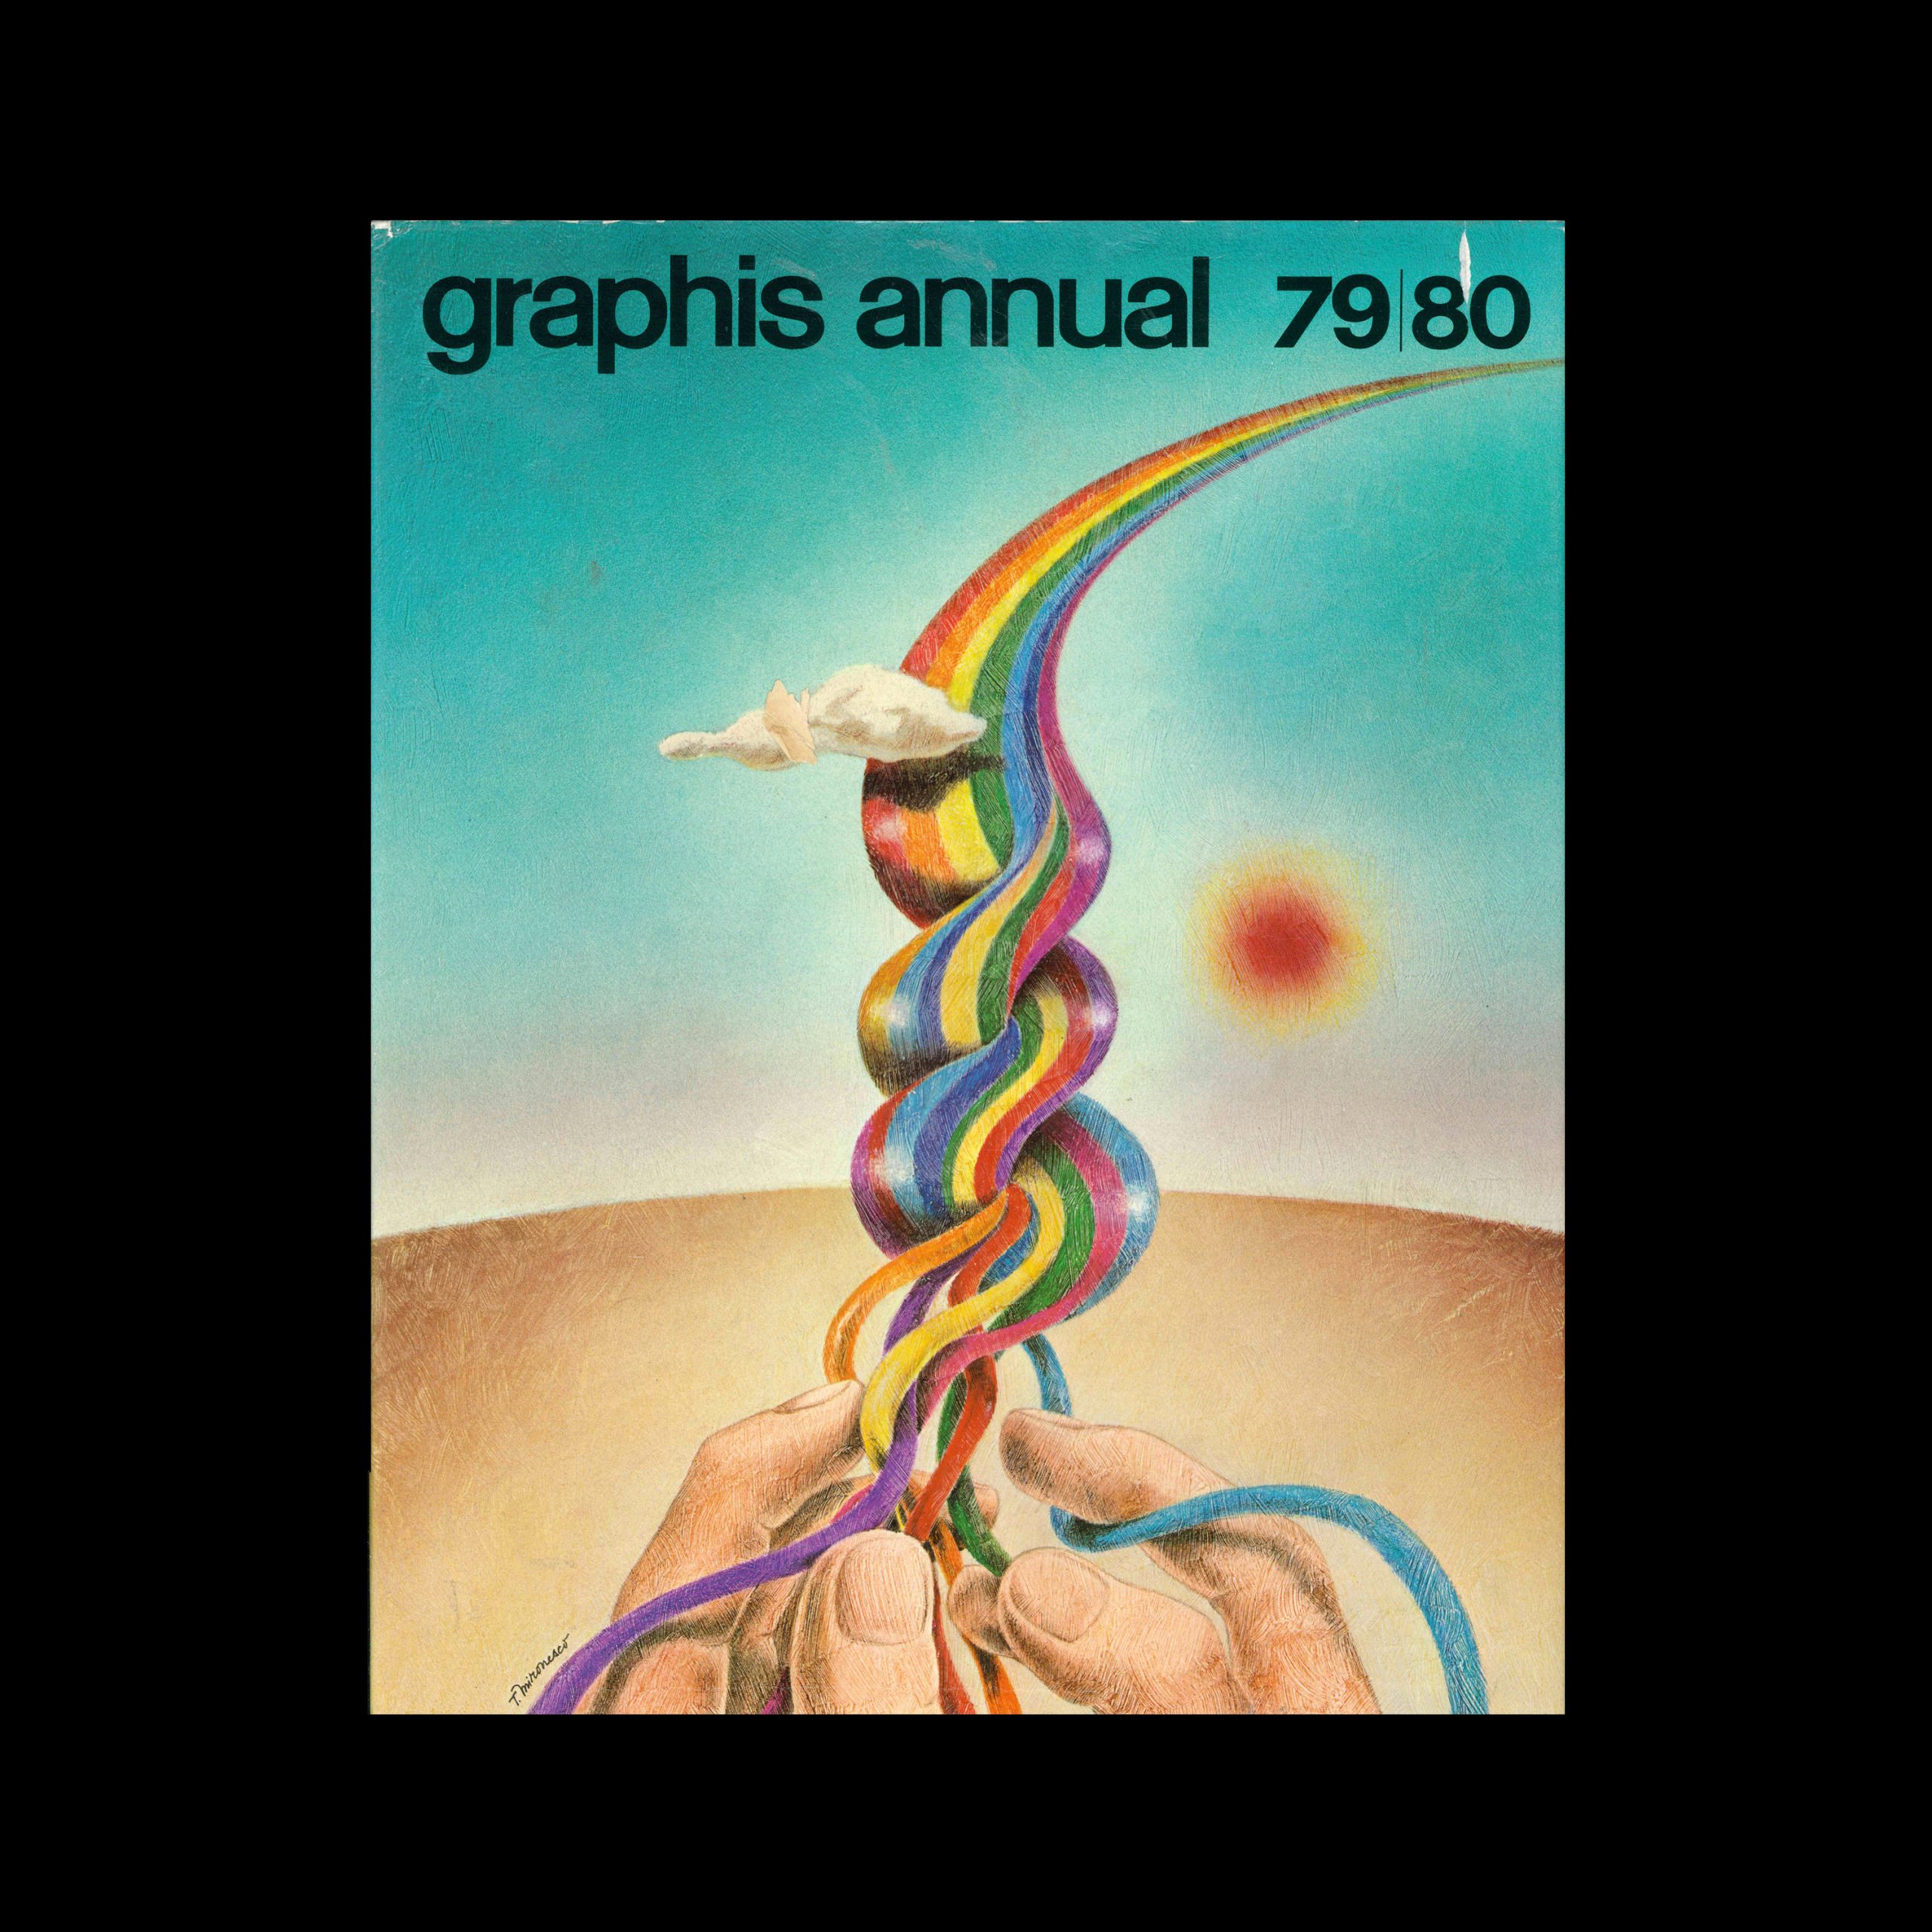 Graphis Annual 1979|80